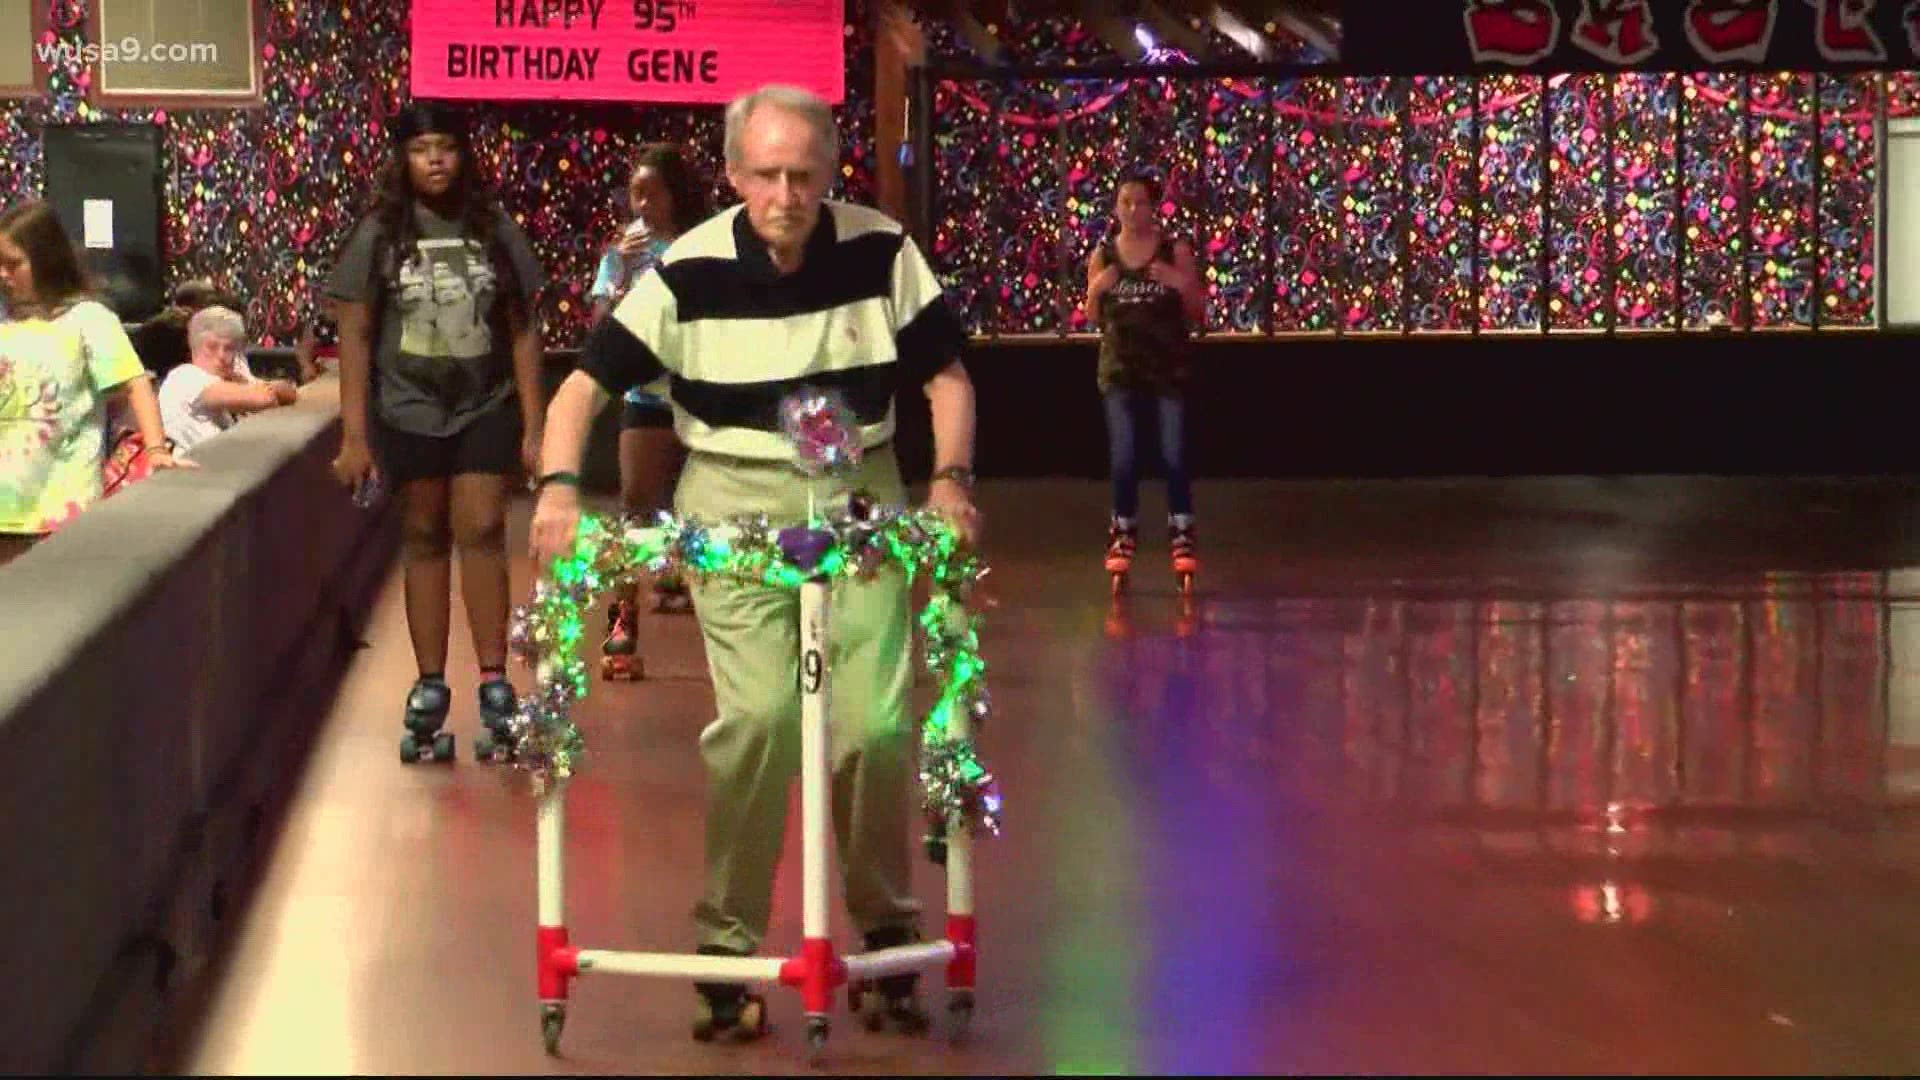 Gene hopes to spend his 100th birthday doing the same thing!